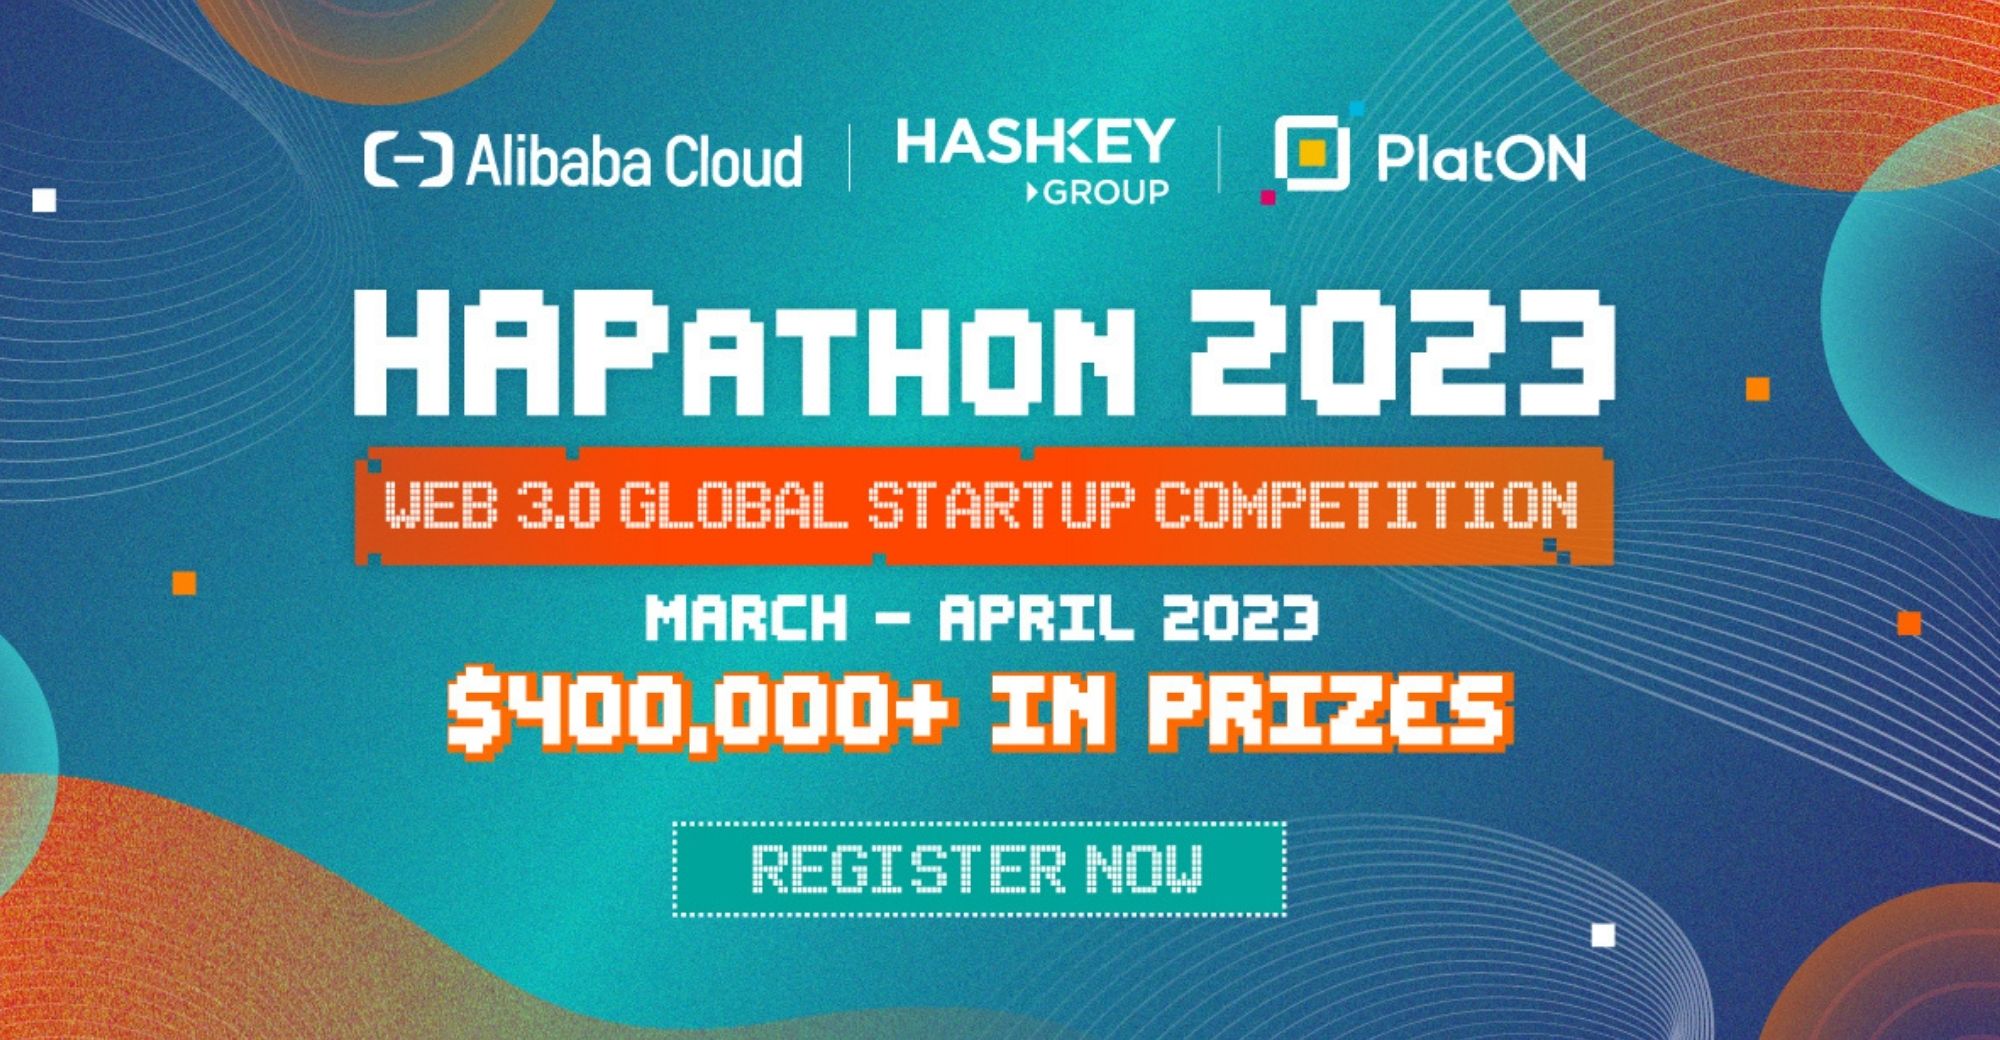 Alibaba Cloud, HashKey and PlatON to Bring Web3 Global Startup Competition to Four Major Cities